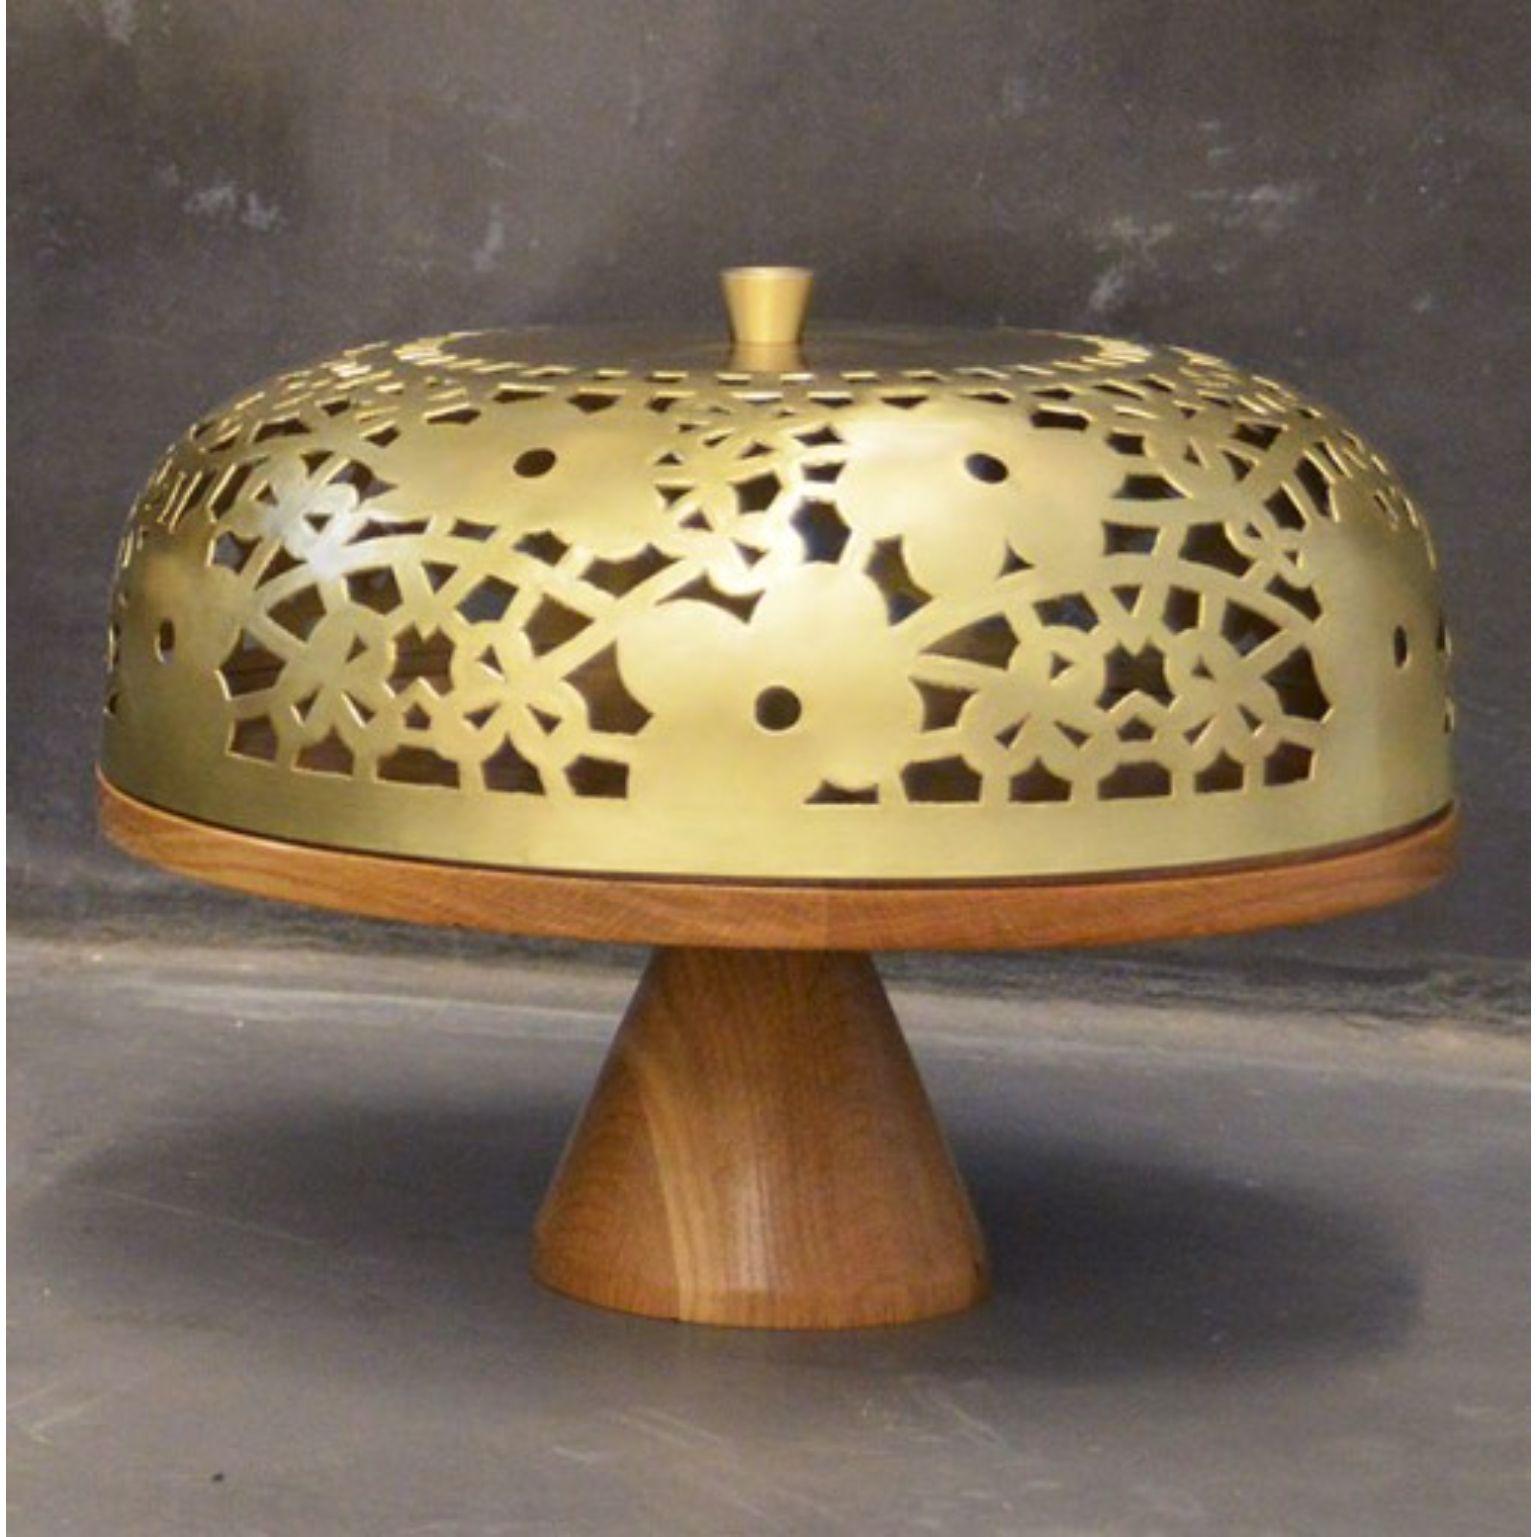 Camille cake stand by Marc Dibeh
2014
Materials: French oak, brass
Dimensions: D 40 x H 35 cm 

Beirut based designer Marc Dibeh narrates his cultural environment through compelling interiors and products.
His studio’s philosophy revolves